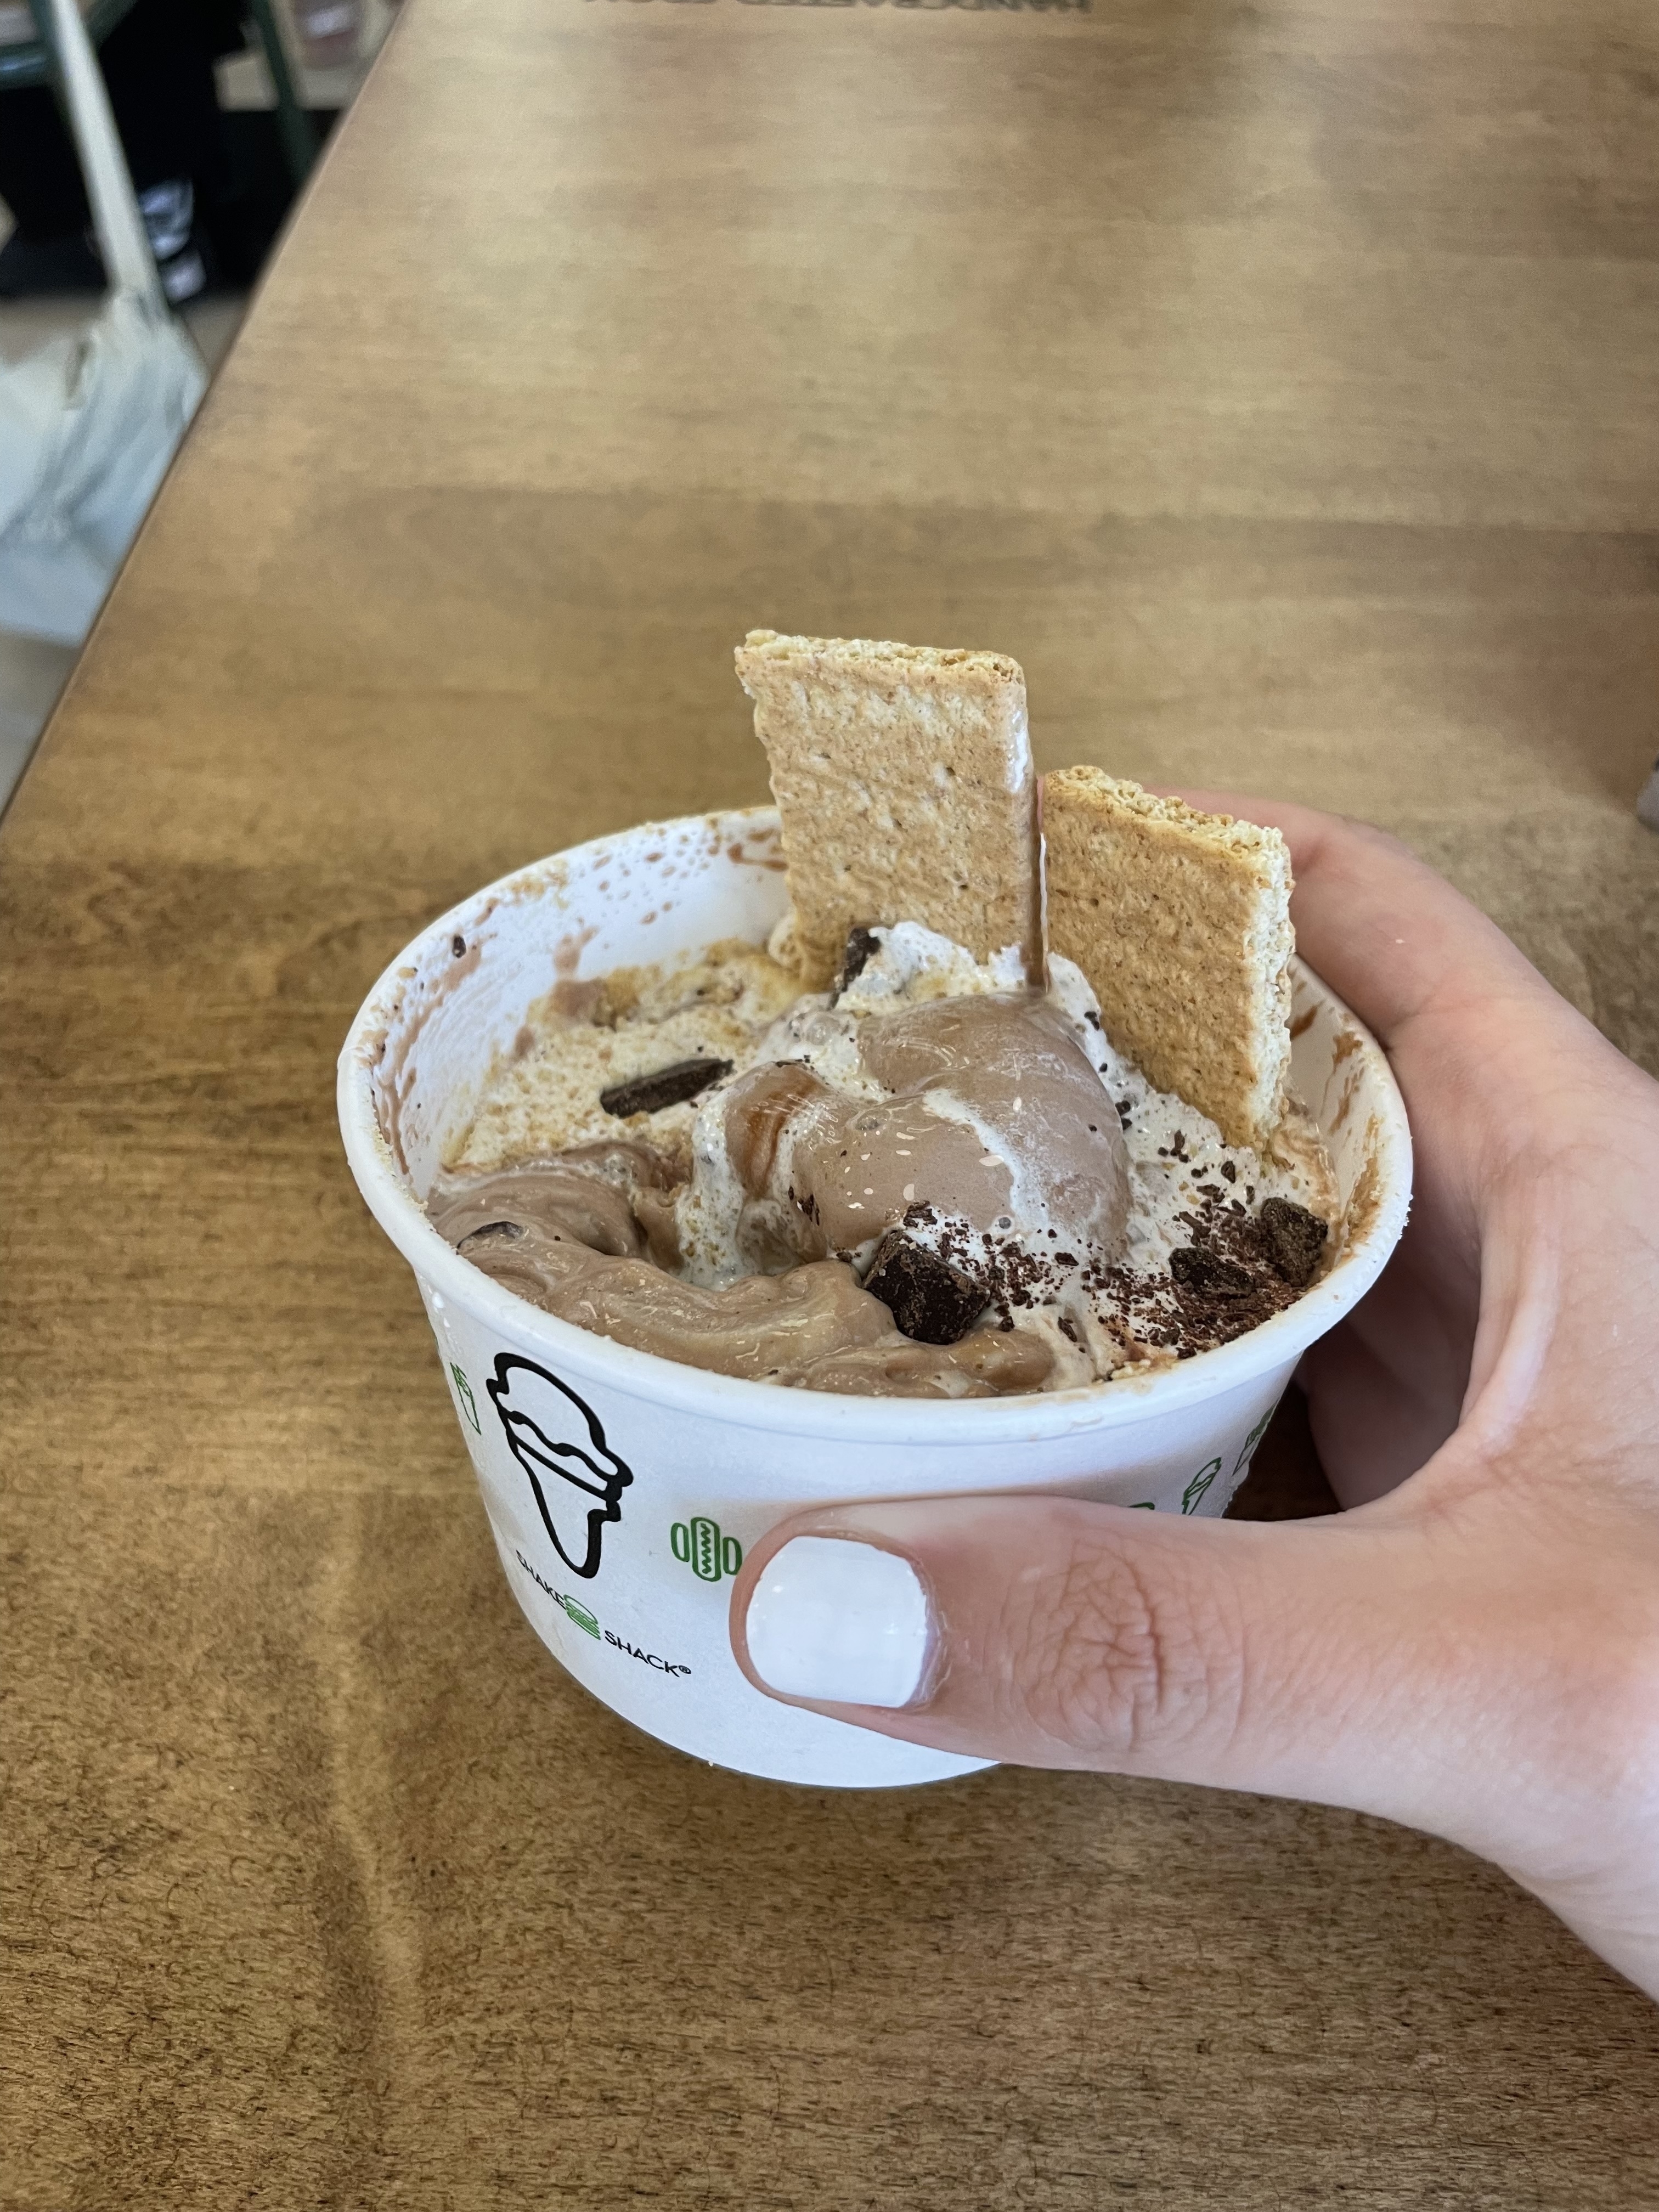 Hand holding a cup of chocolate ice cream with graham crackers and whipped cream on top, served in a Shake Shack cup